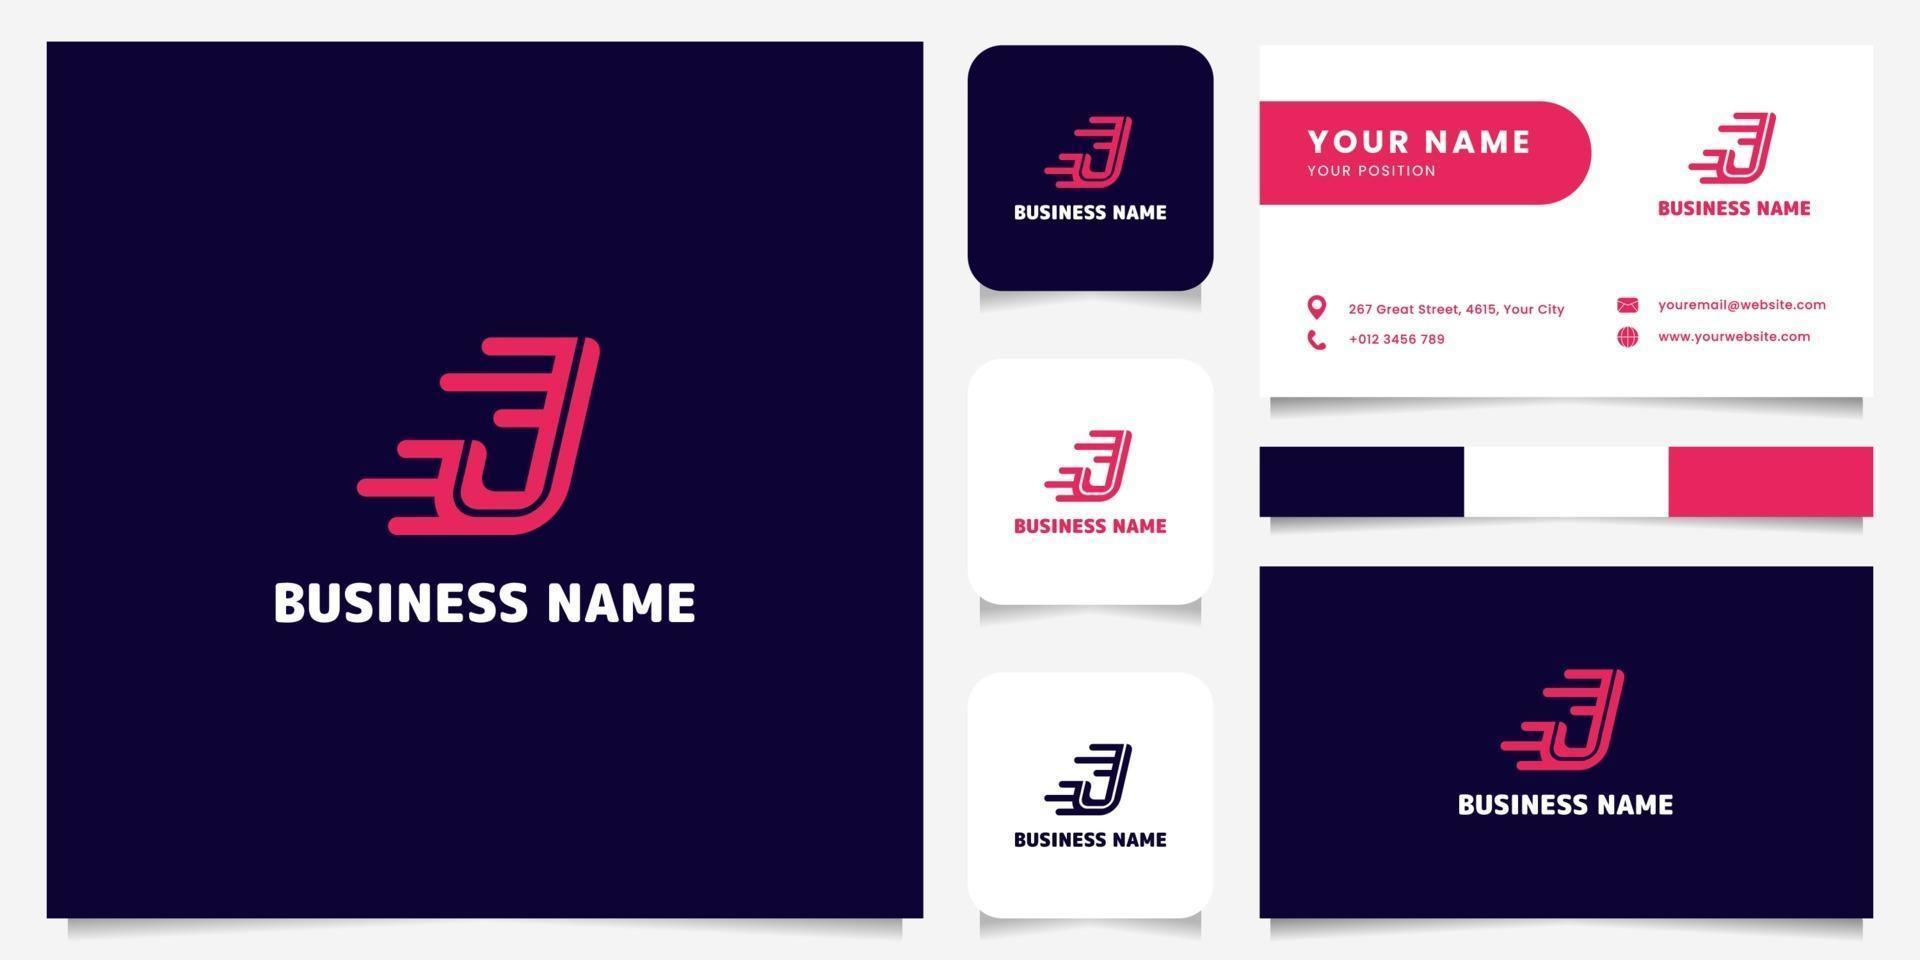 Simple and Minimalist Bright Pink Letter J Speed Logo in Dark Background Logo with Business Card Template vector